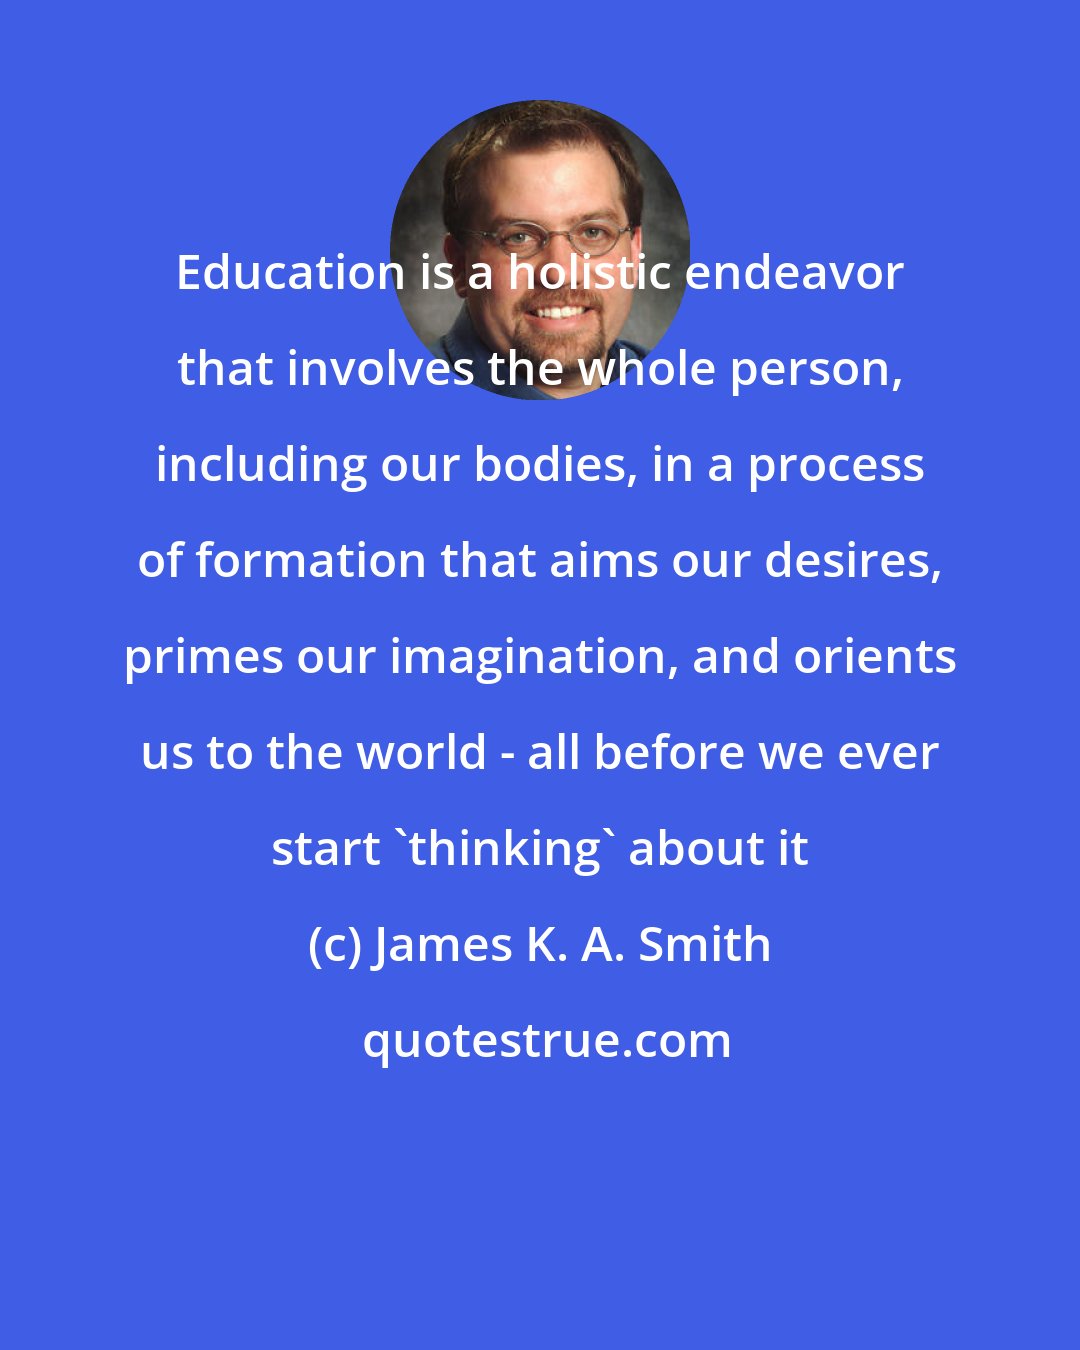 James K. A. Smith: Education is a holistic endeavor that involves the whole person, including our bodies, in a process of formation that aims our desires, primes our imagination, and orients us to the world - all before we ever start 'thinking' about it